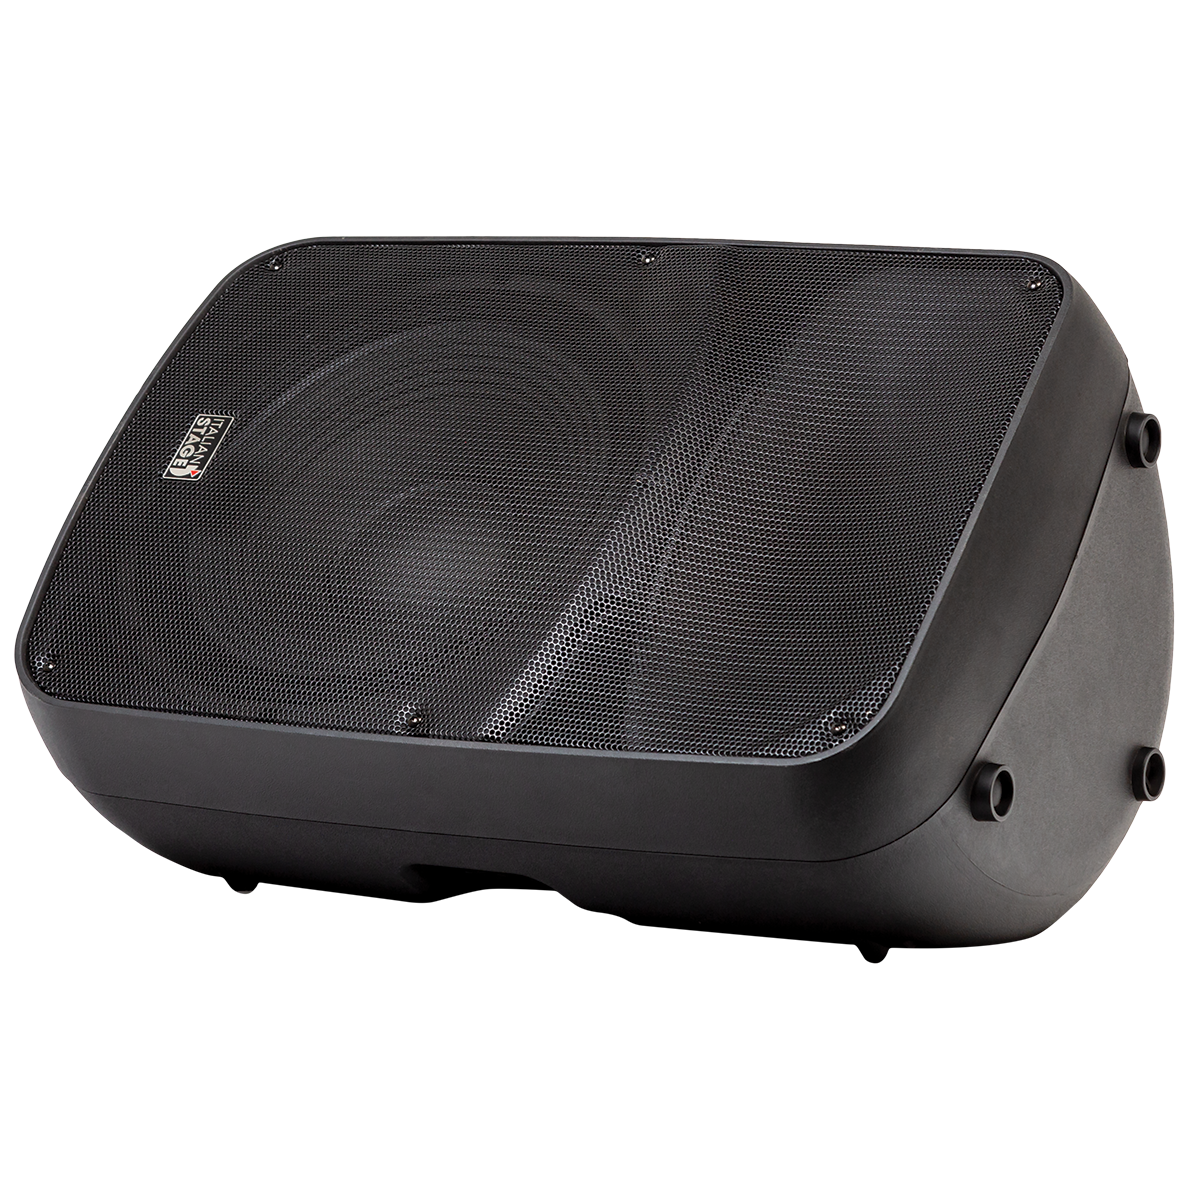 Italian Stage 15" Speaker with Media Player